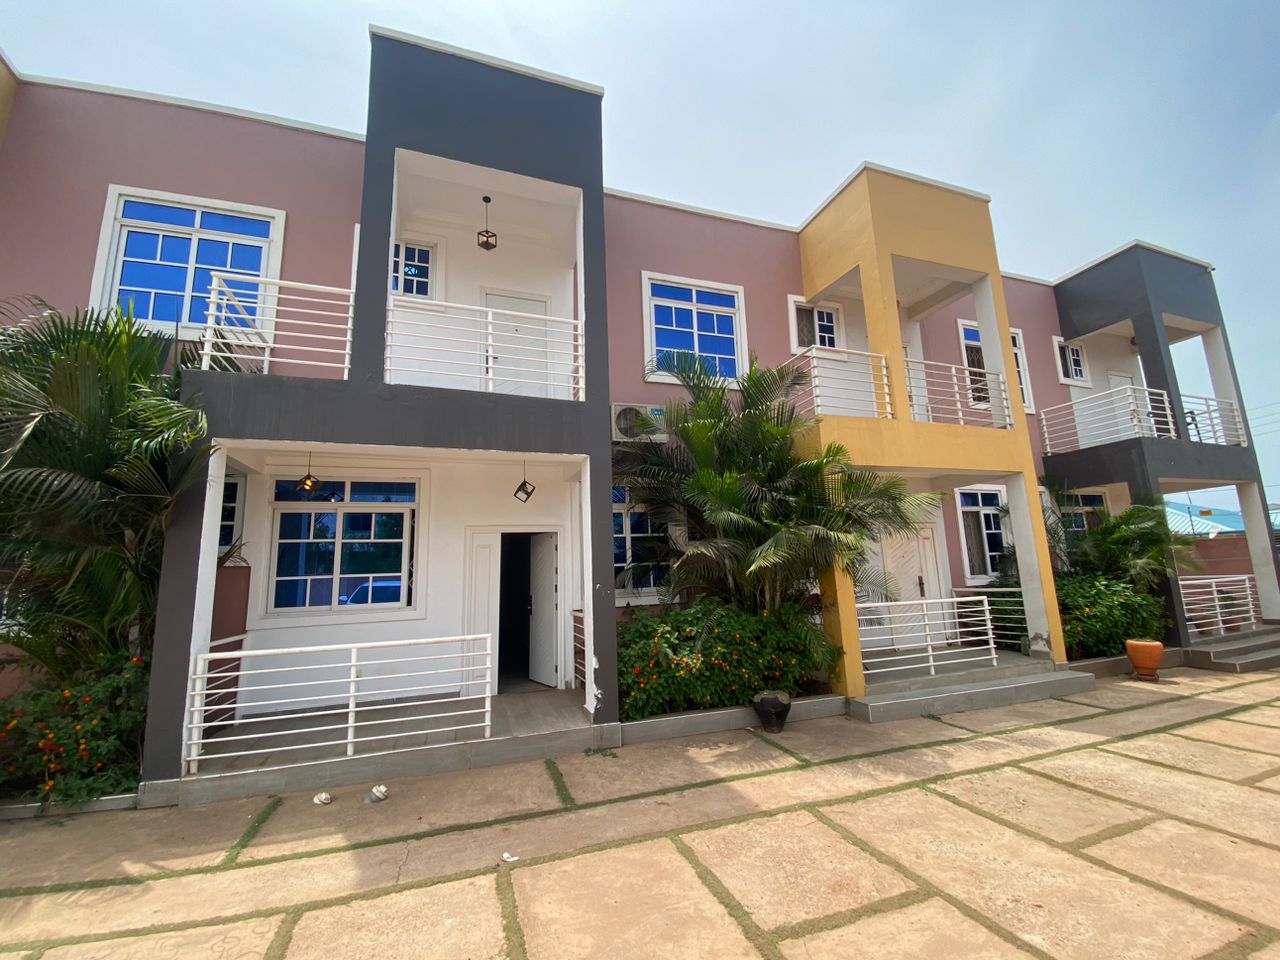 Two 2-Bedroom Townhouse Apartment for Rent at Tse Addo